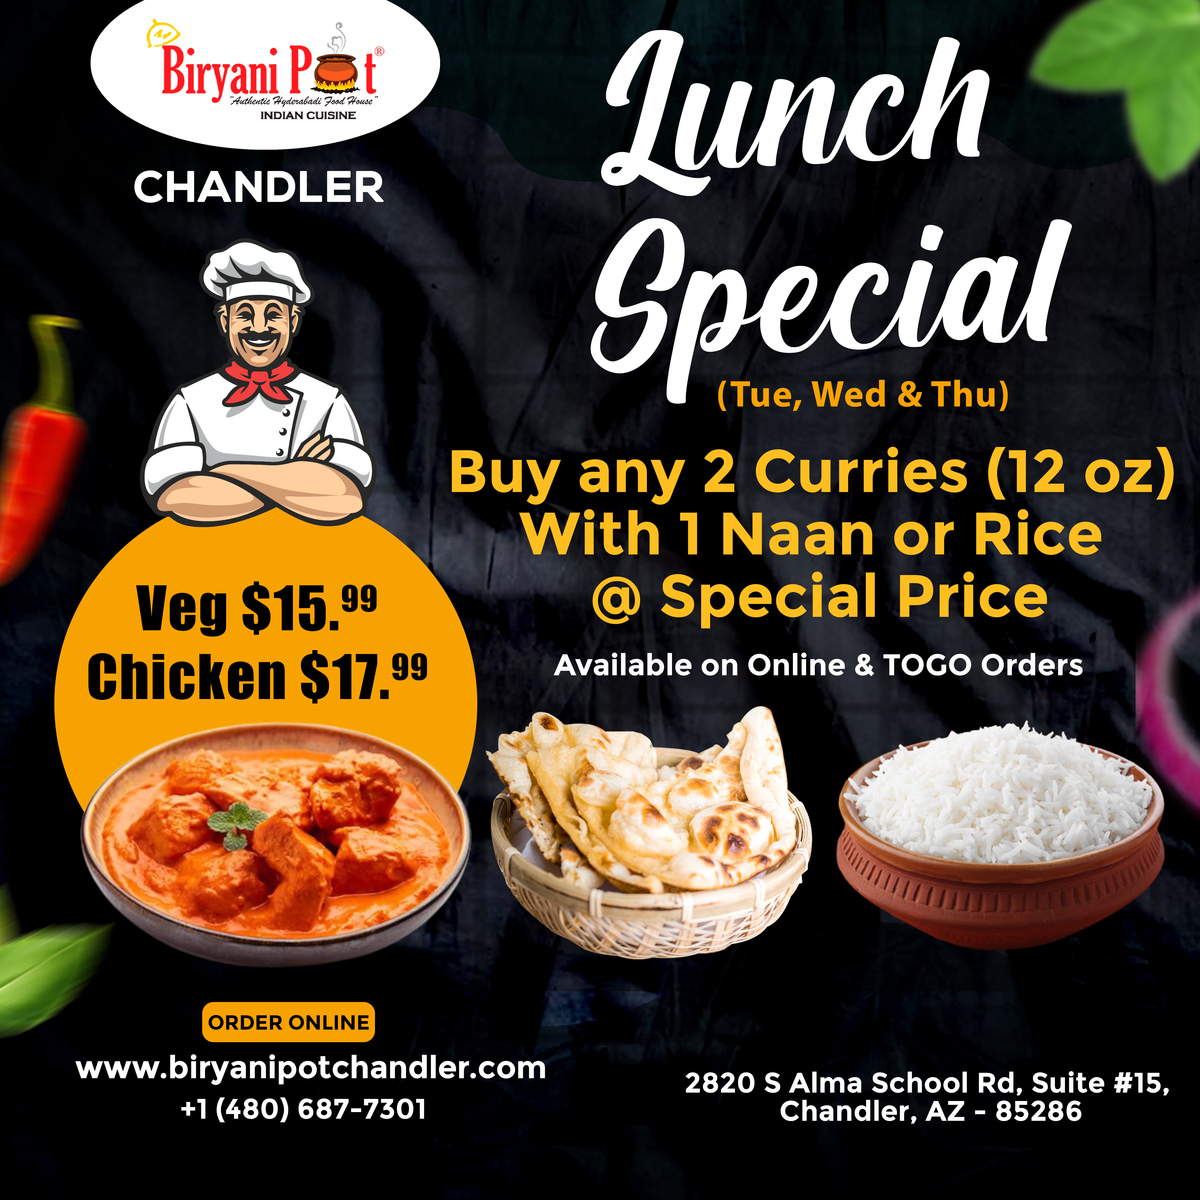 Lunch Special (Tue, Wed & Thu)